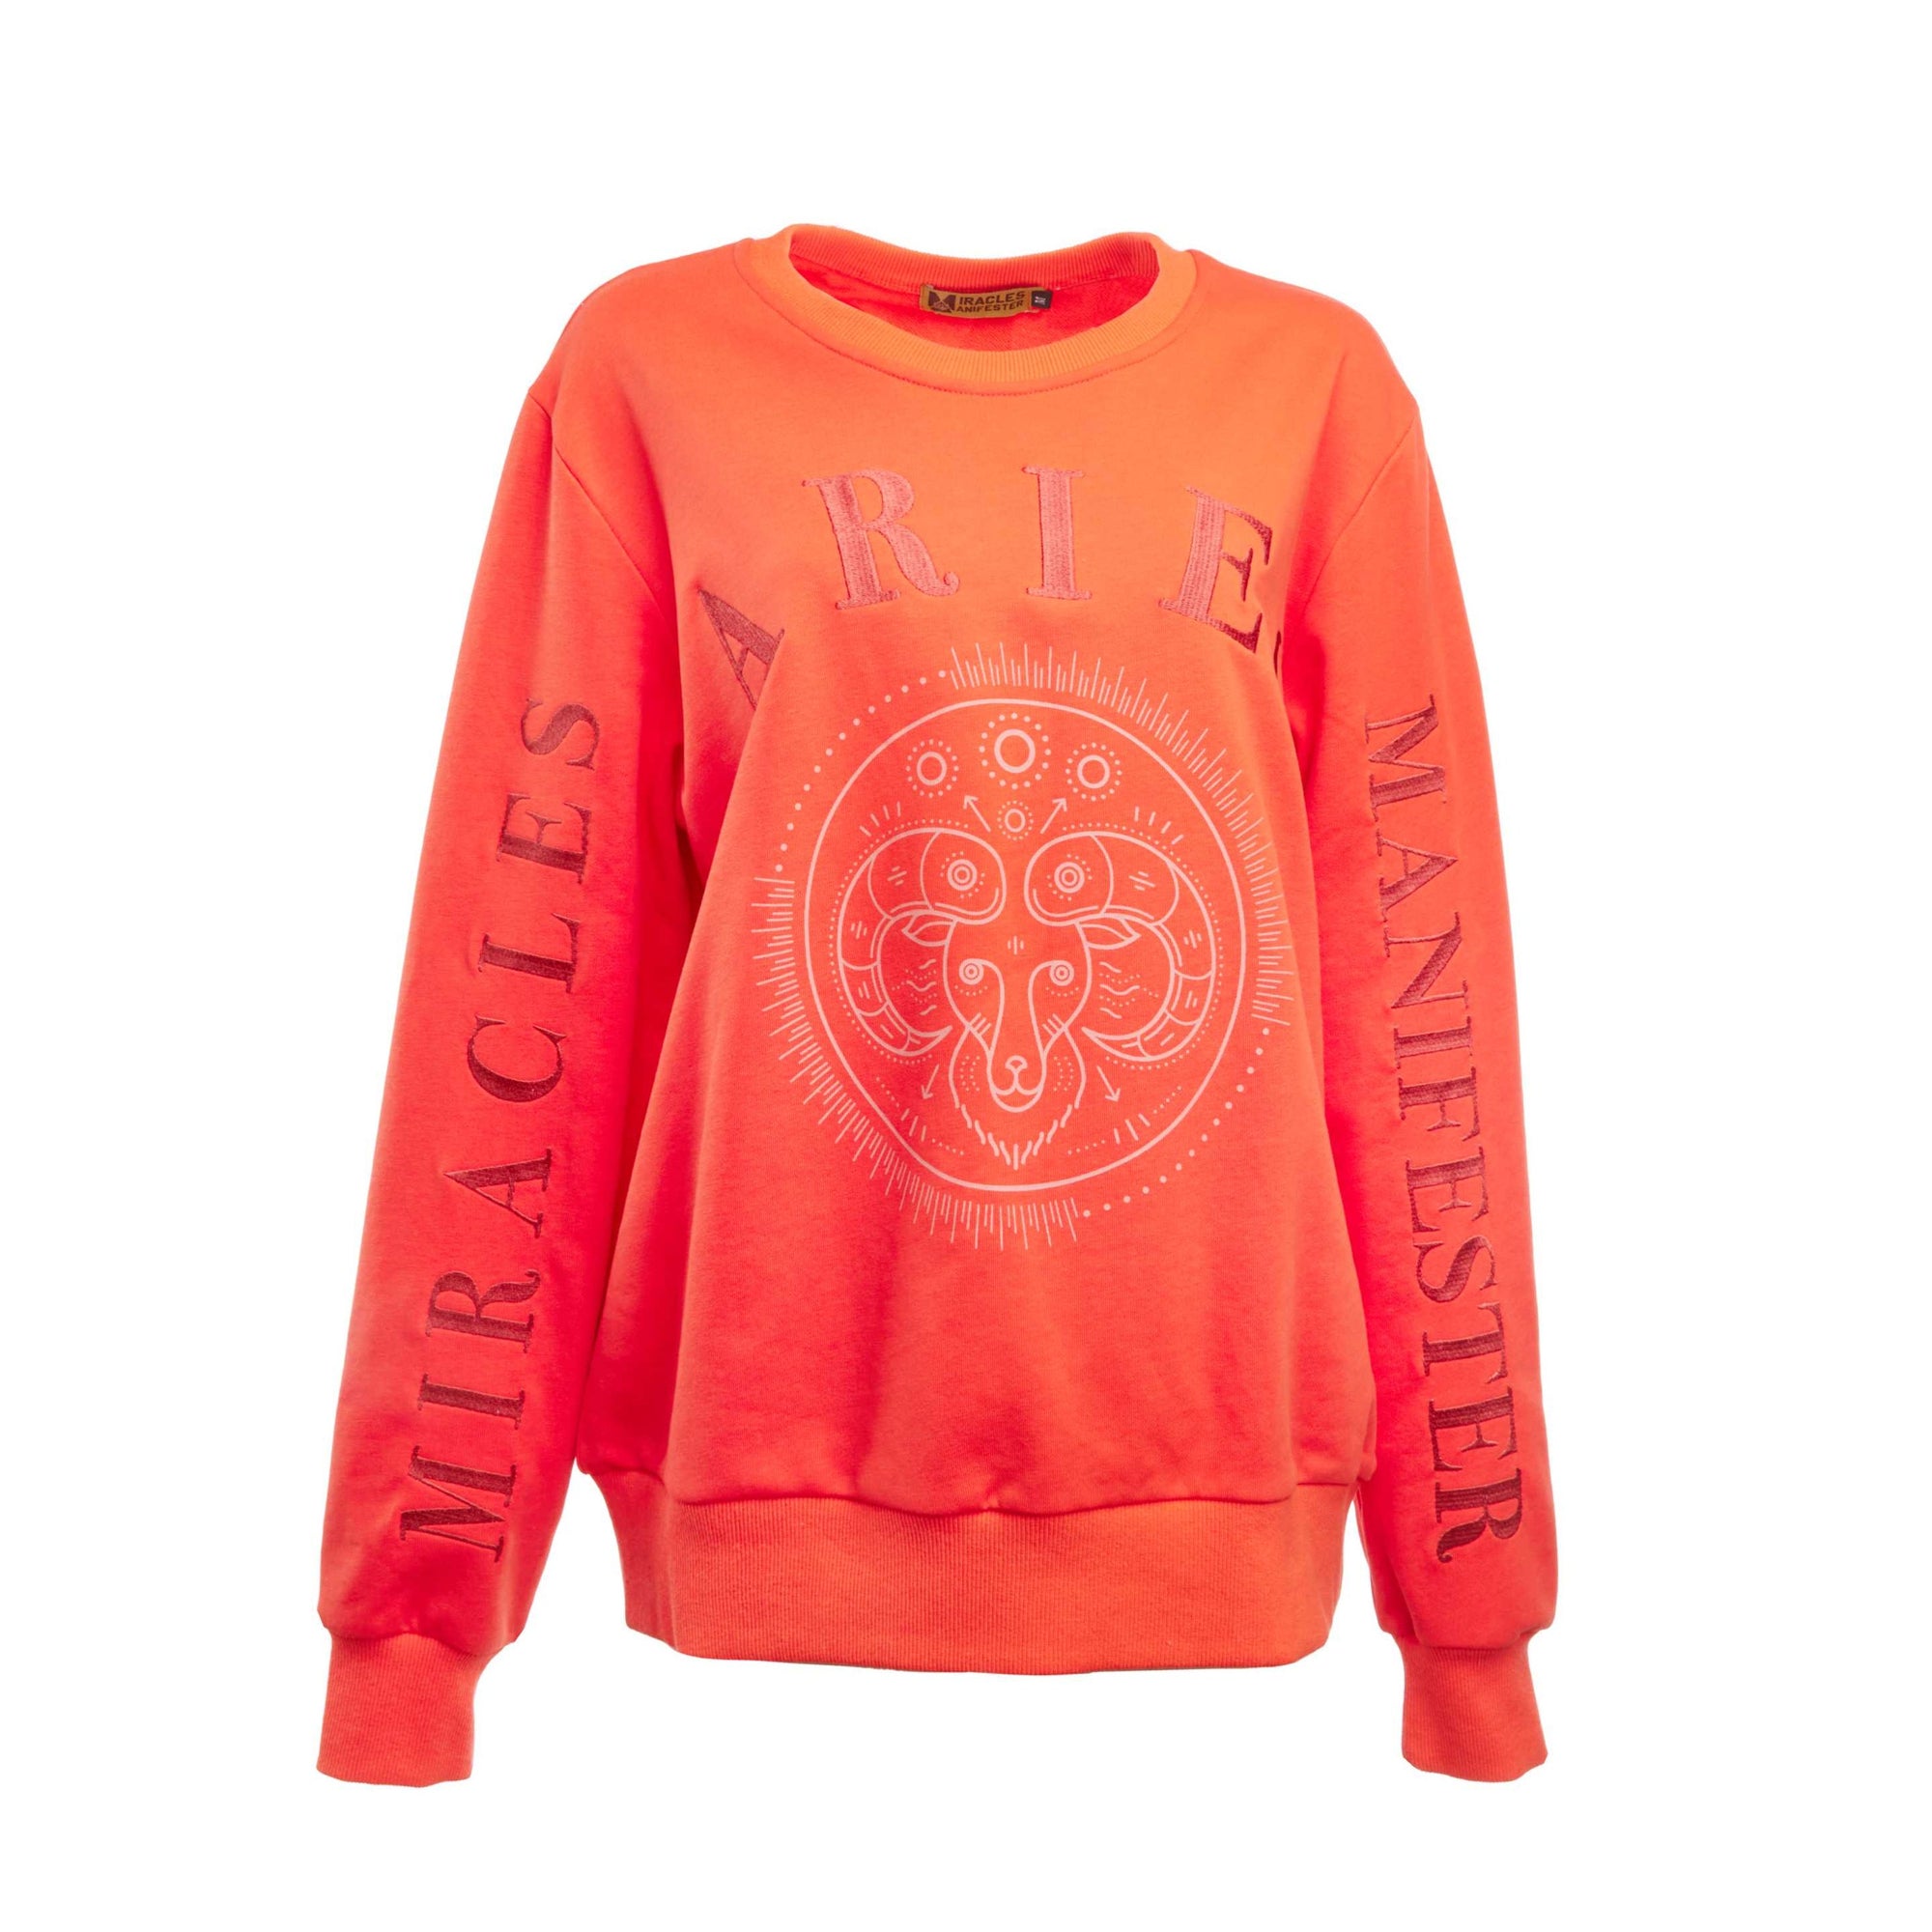 Embroidered Aries Zodiac Sign Sweatshirt - Red